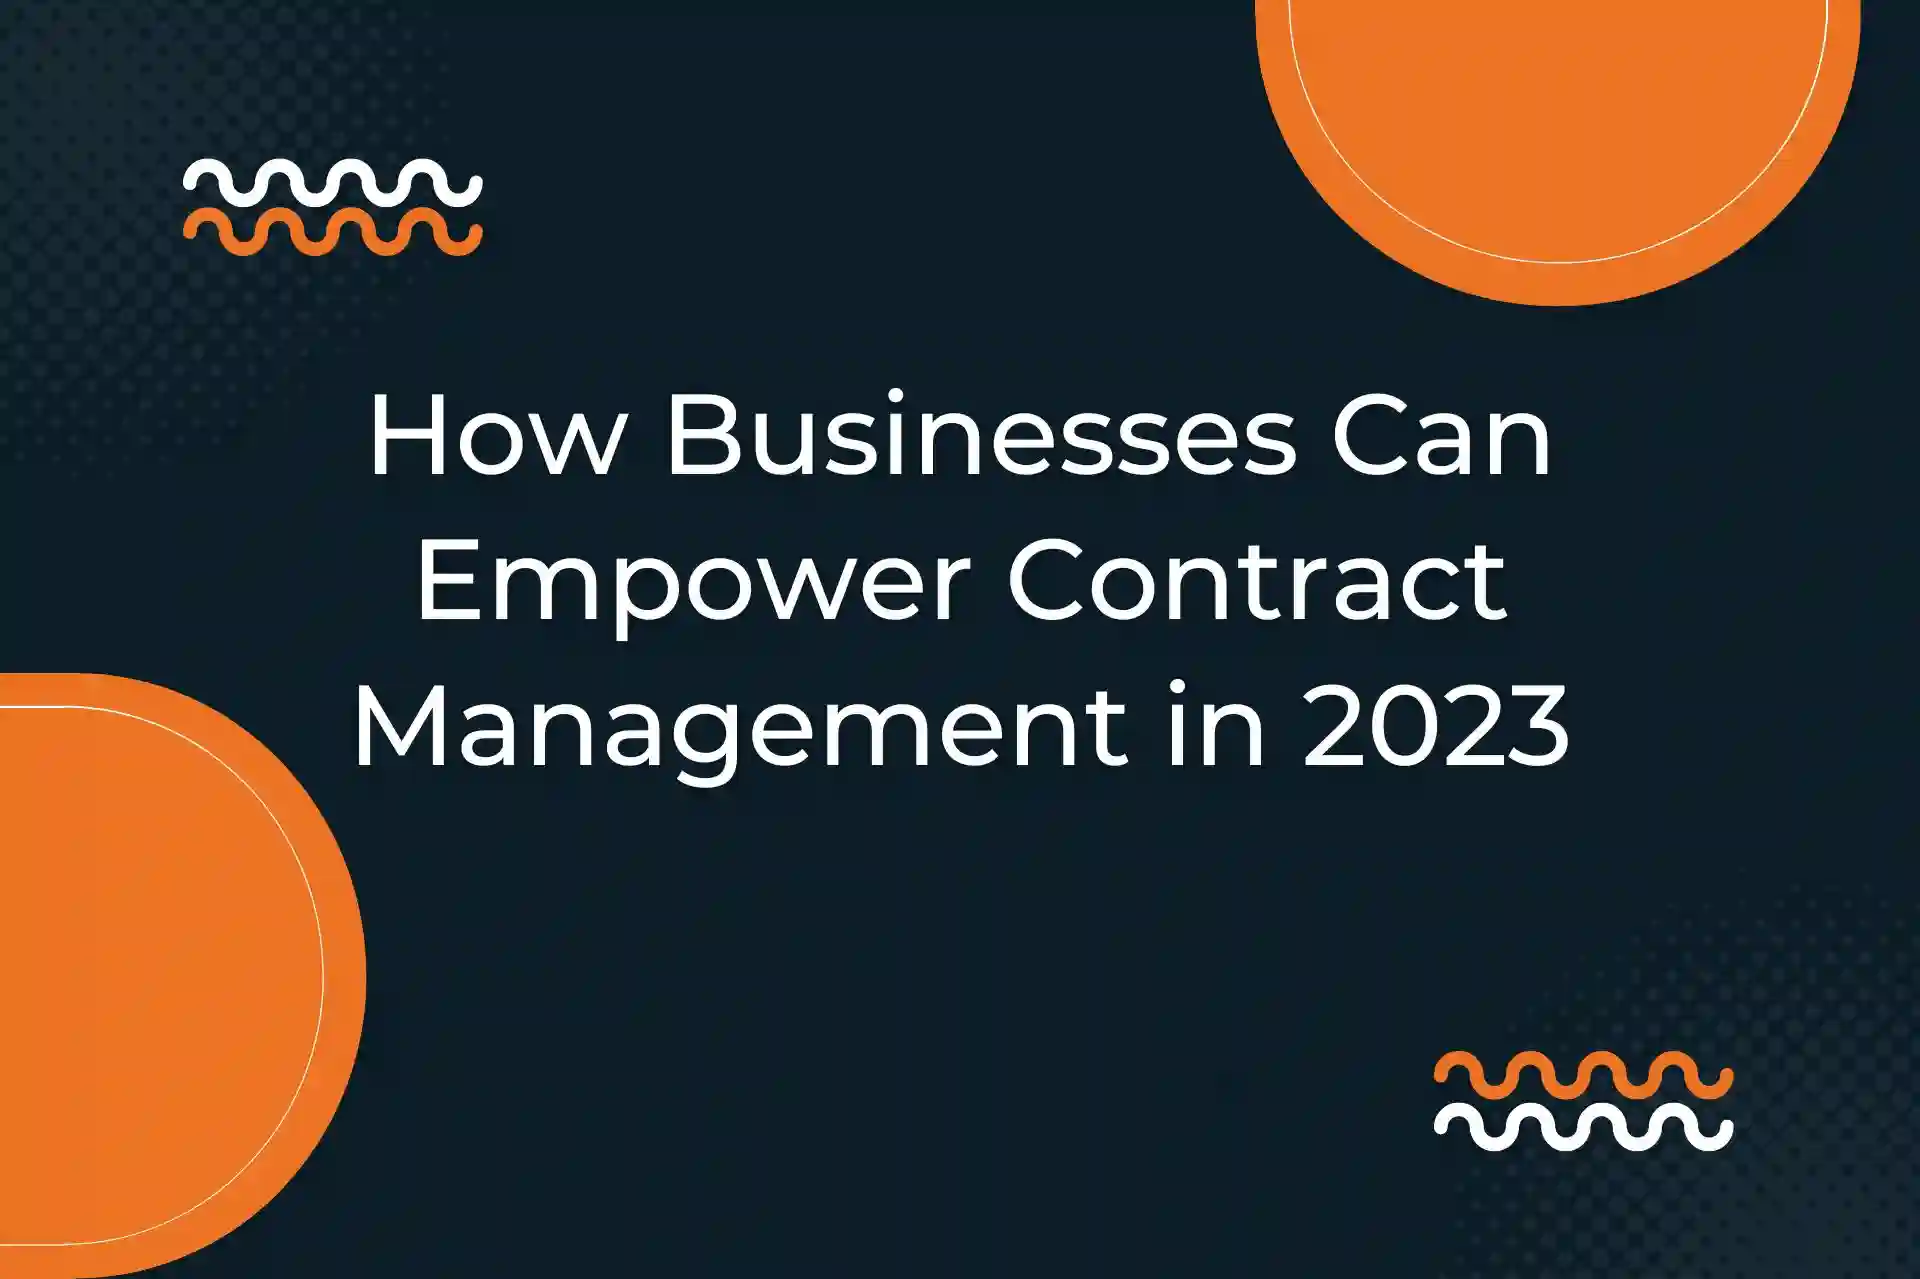 How Businesses Can Empower Contract Management